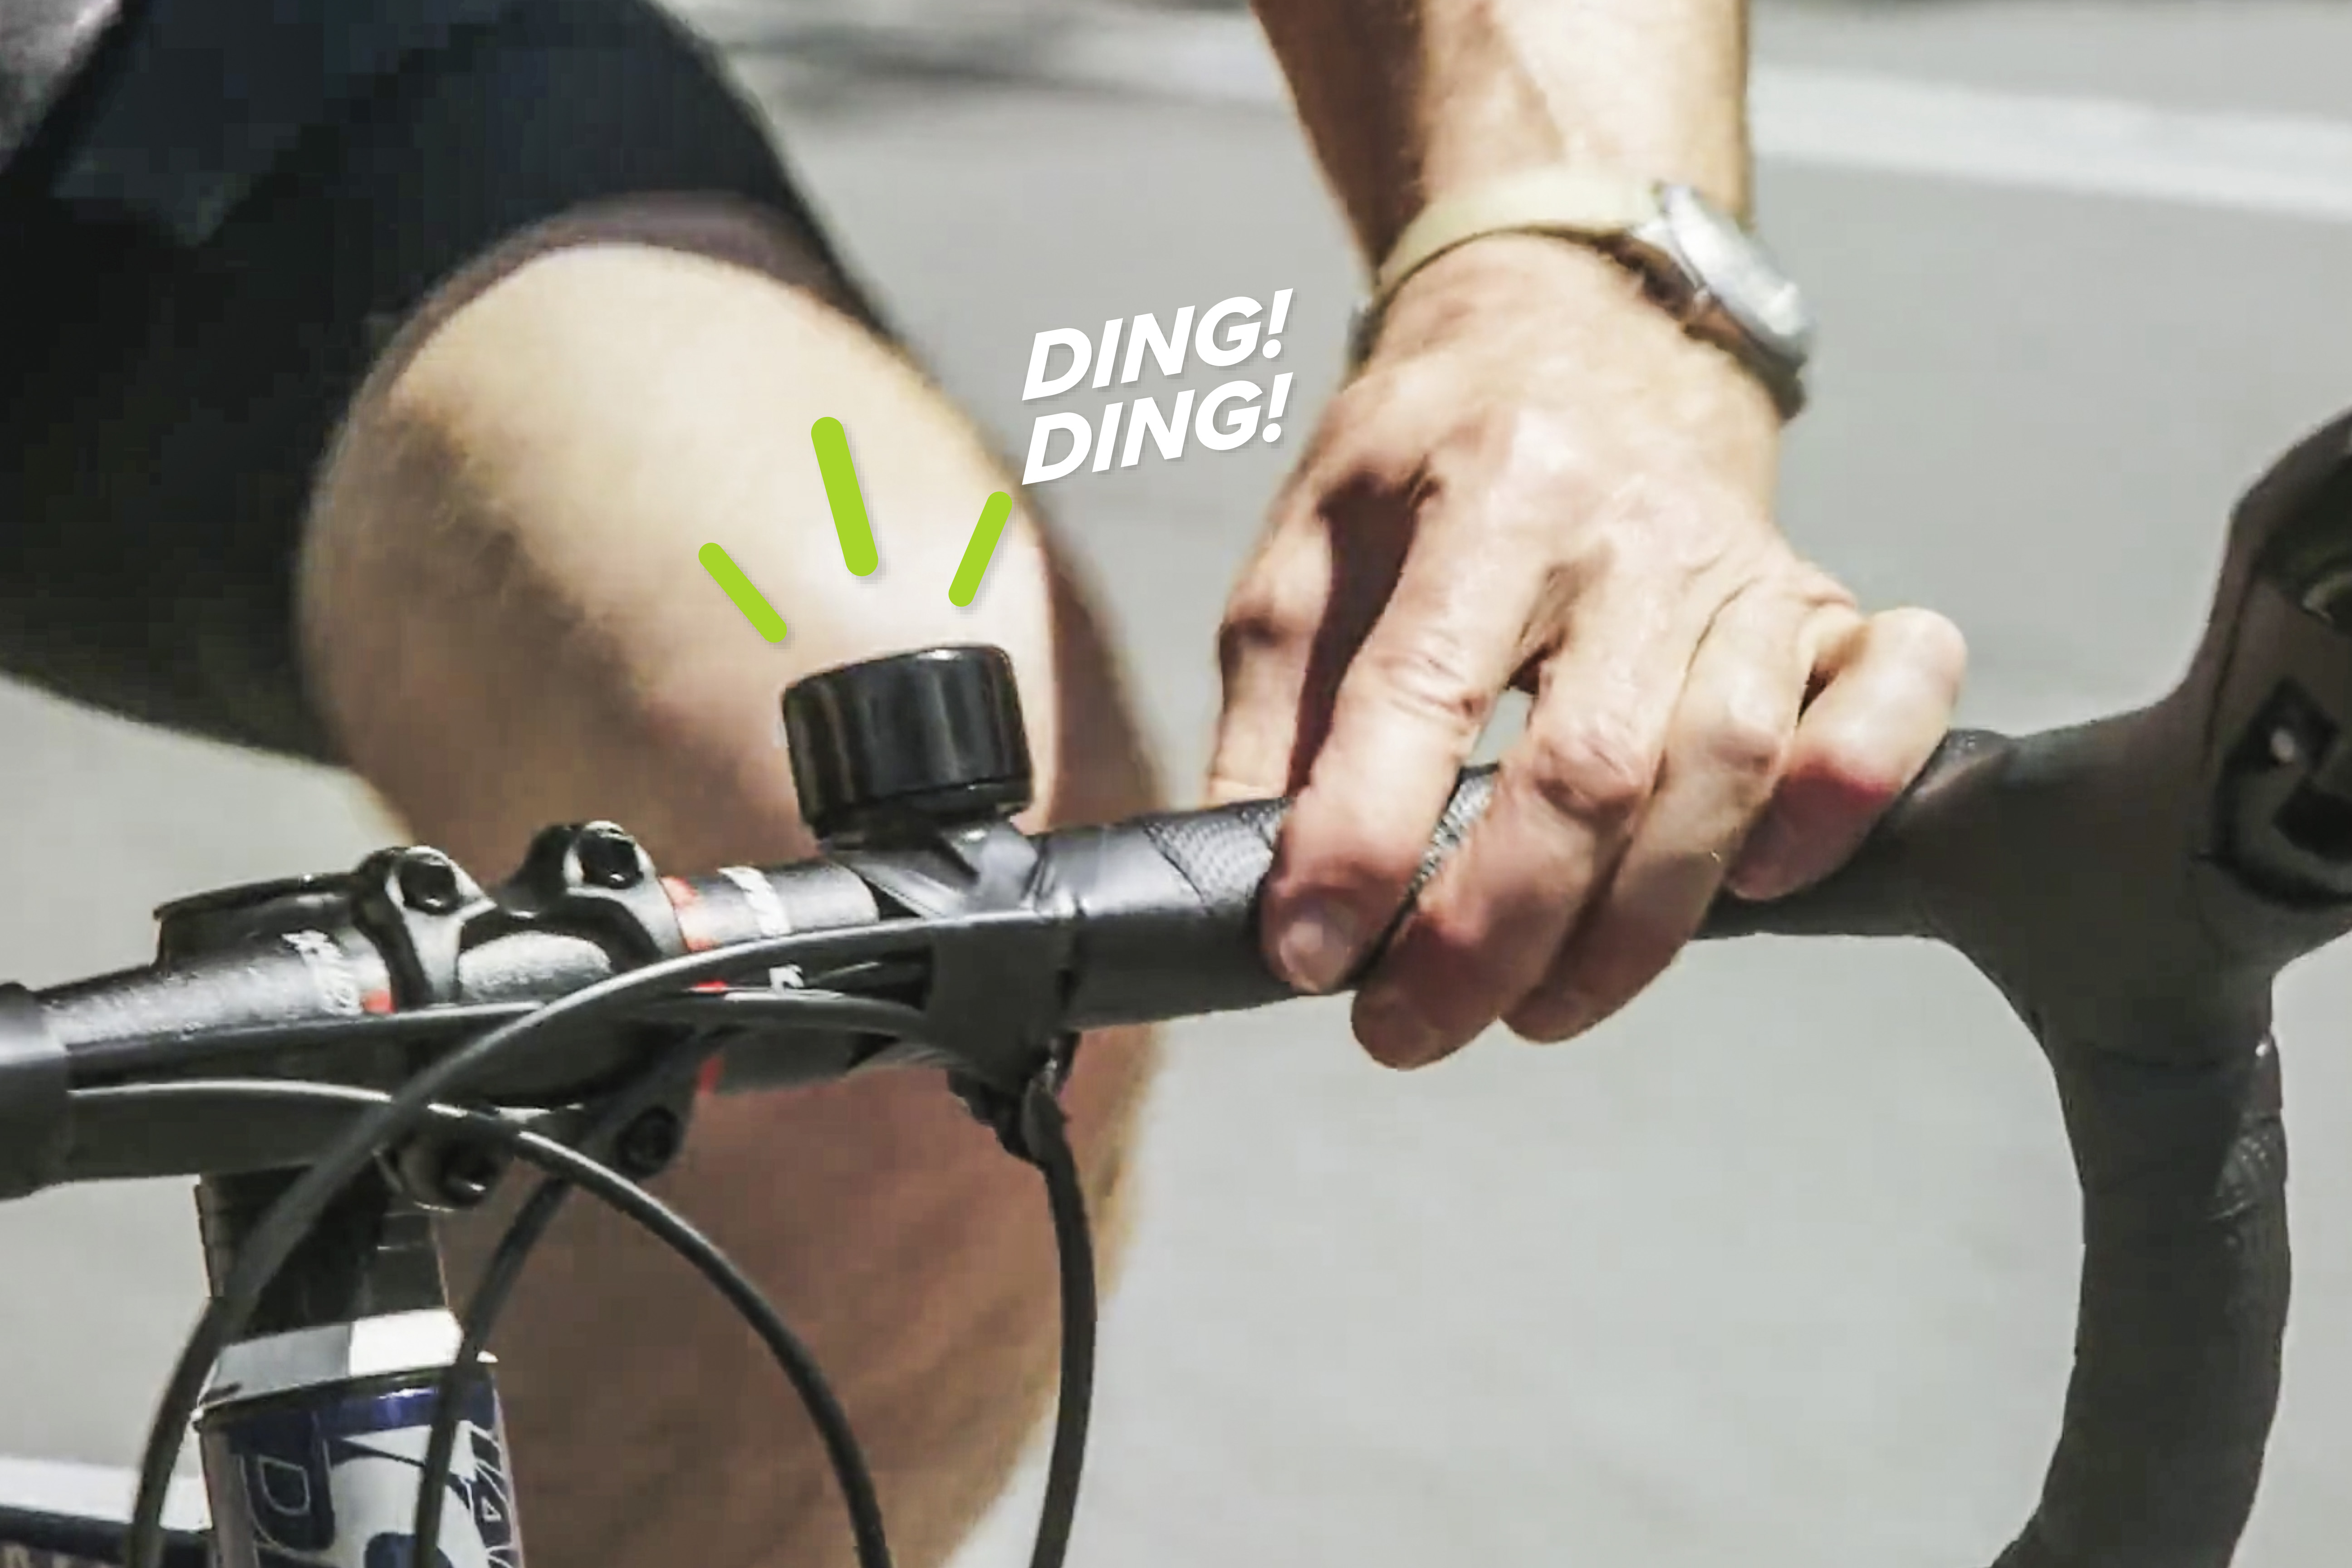 use a bike bell to warn others you're passing